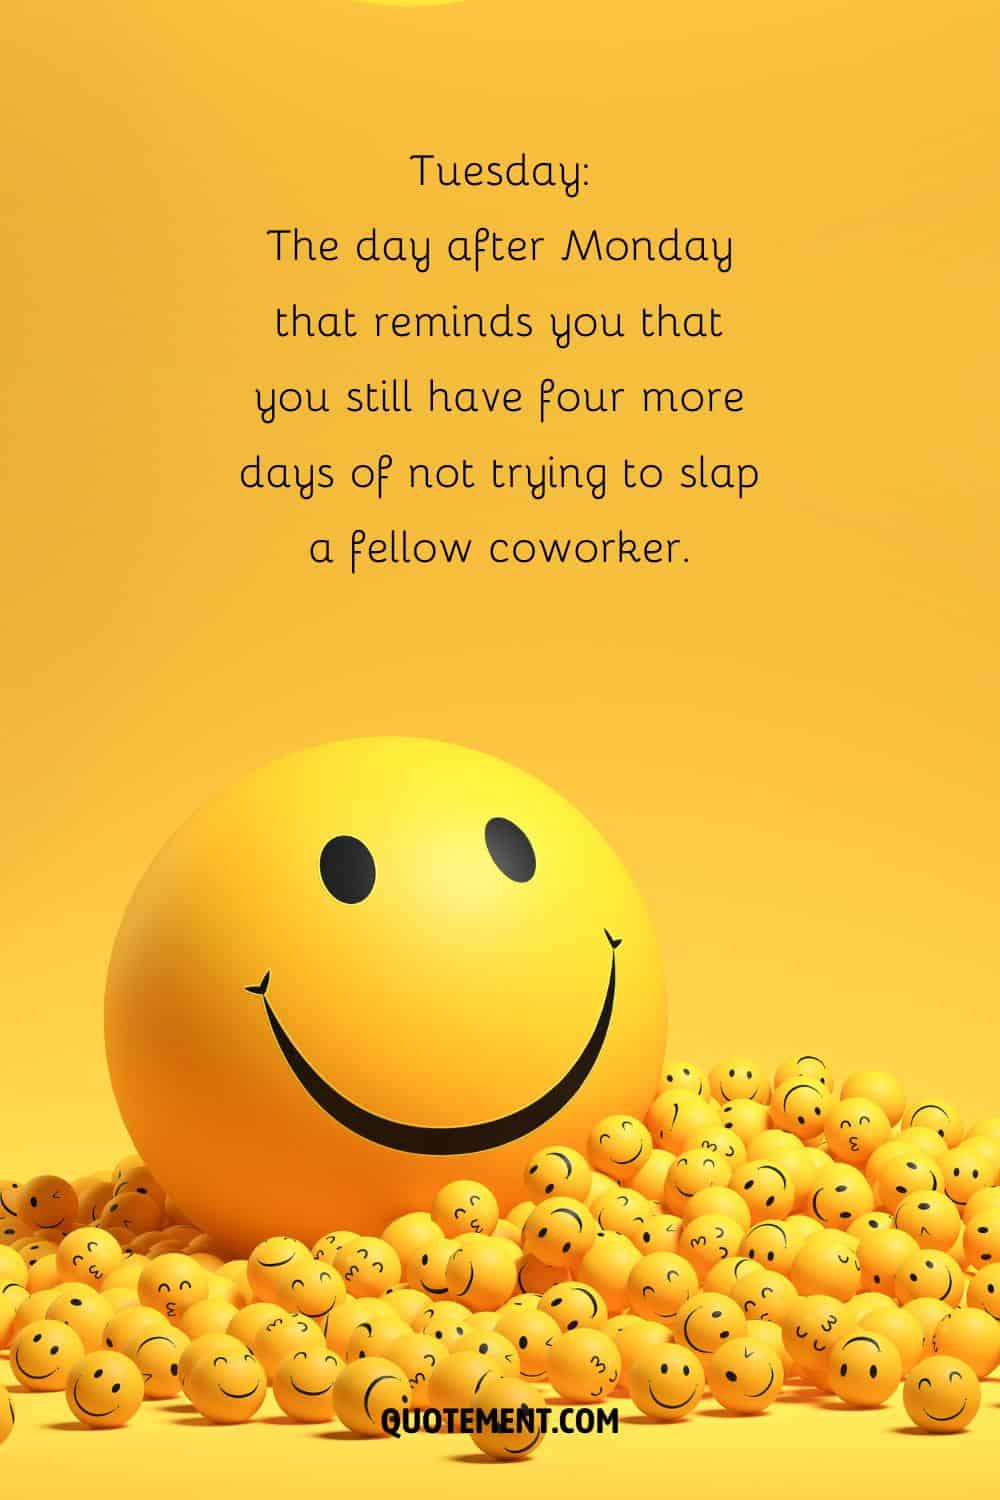 image of smile emojis representing Tuesday motivation funny quote